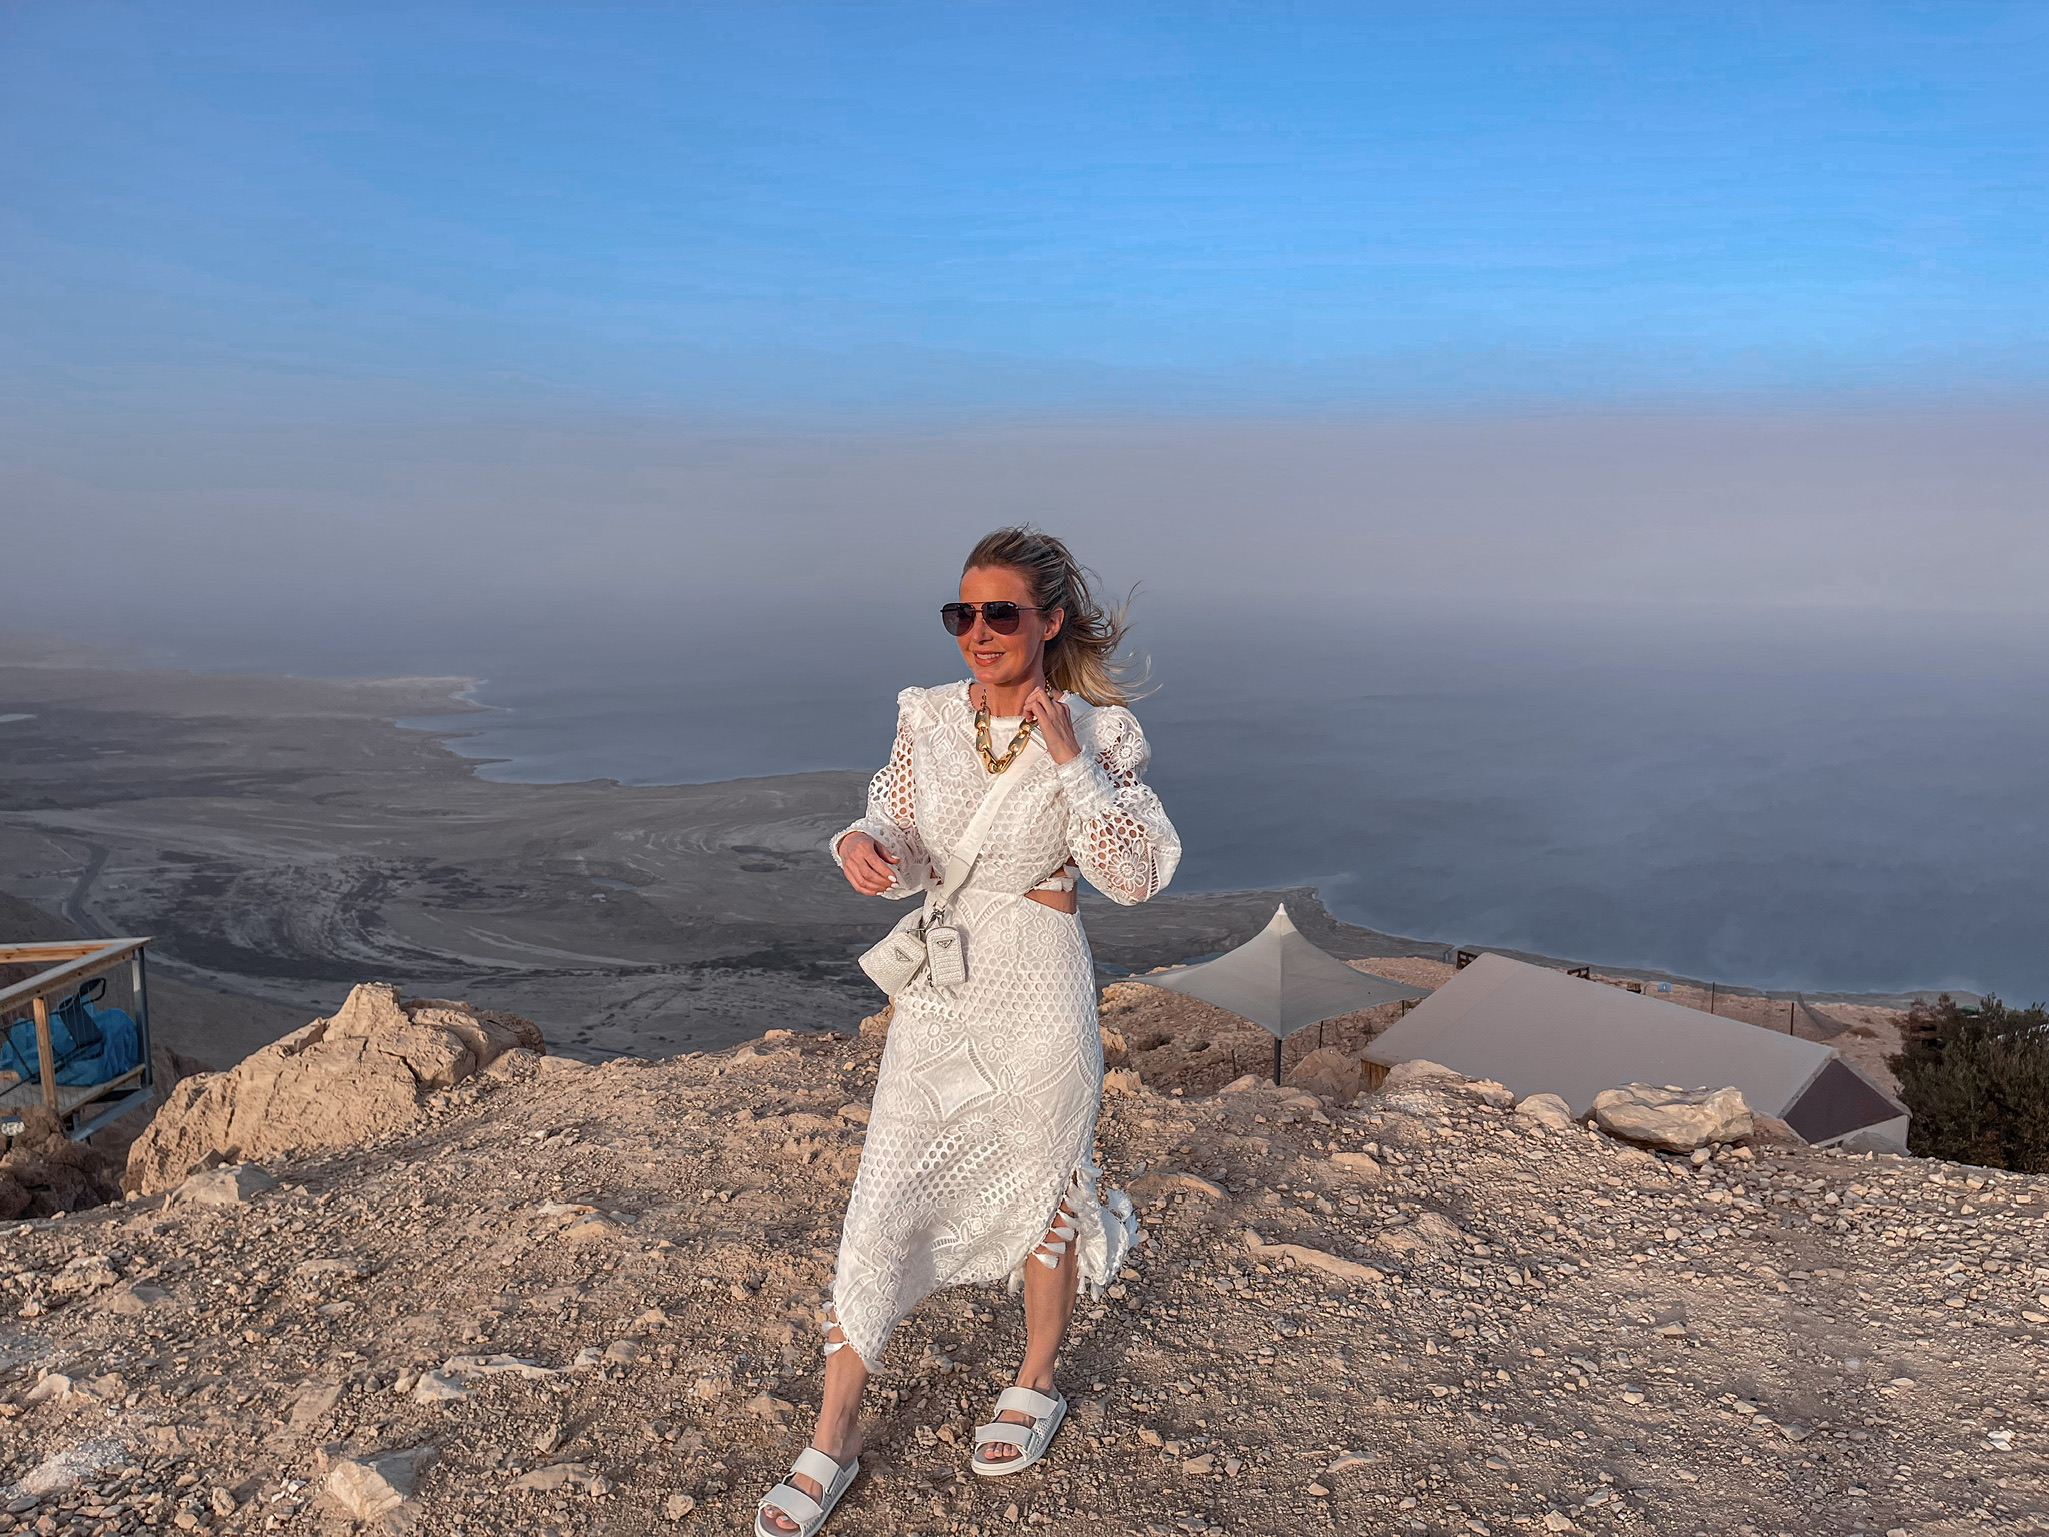 What I wore at a party in Israel by the Dead Sea, white backless dress by Elliatt